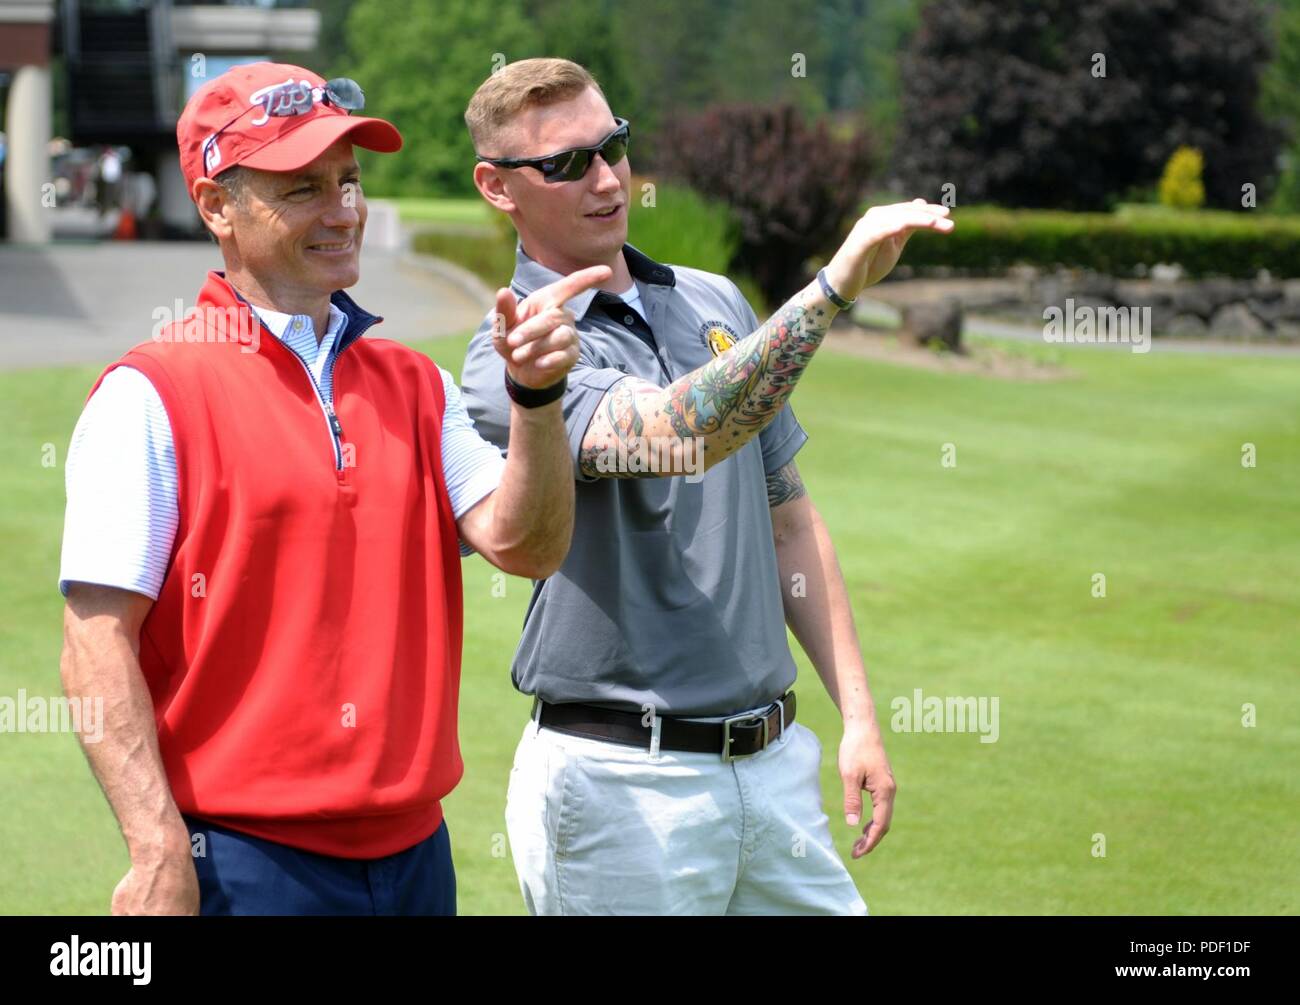 Sgt. Joseph Erlach, from the 42nd Military Police Brigade on Joint Base Lewis-McChord, gives advice to David Kass, Salish Cliffs Golf Club’s PGA Director of Golf, on the ninth hole during the Muckleshoot Casino Washington Open Pro-Am May 19 at the Meridian Valley Country Club in Kent, Washington. The event took place over Armed Forces Weekend. U.S. Army Stock Photo